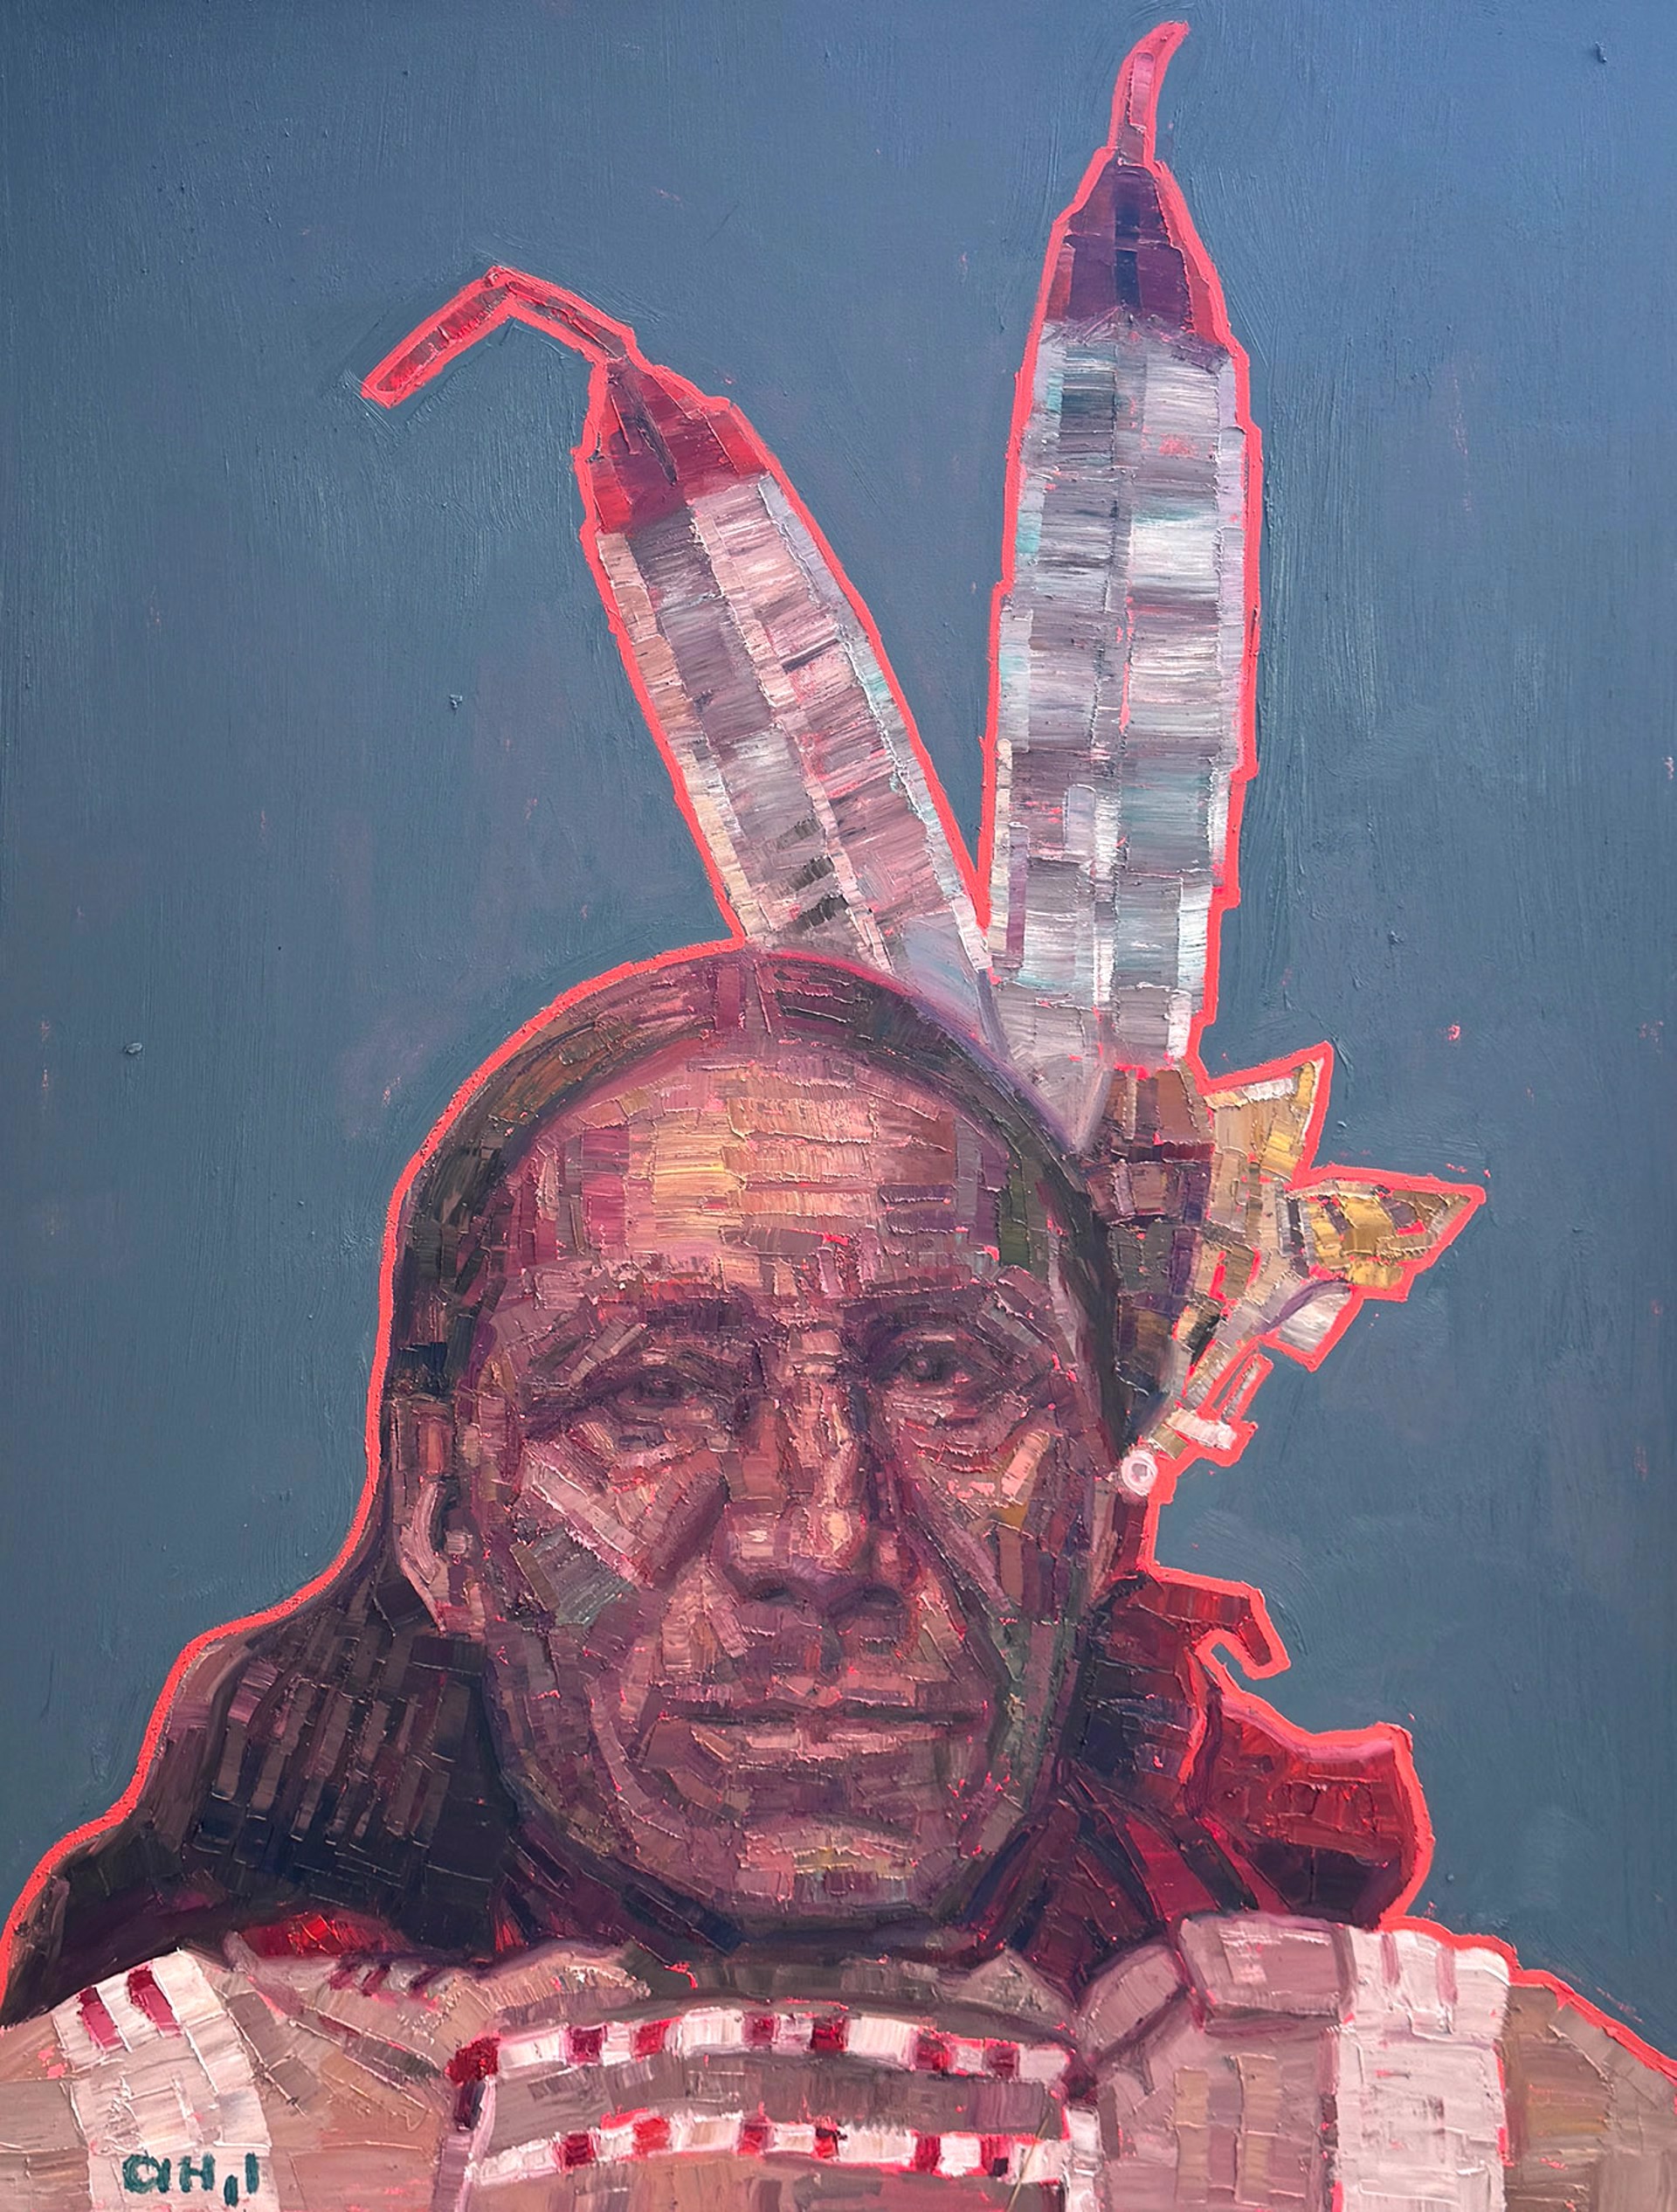 Original Oil Painting By Aaron Hazel Featuring A Portrait Of A Native American Man